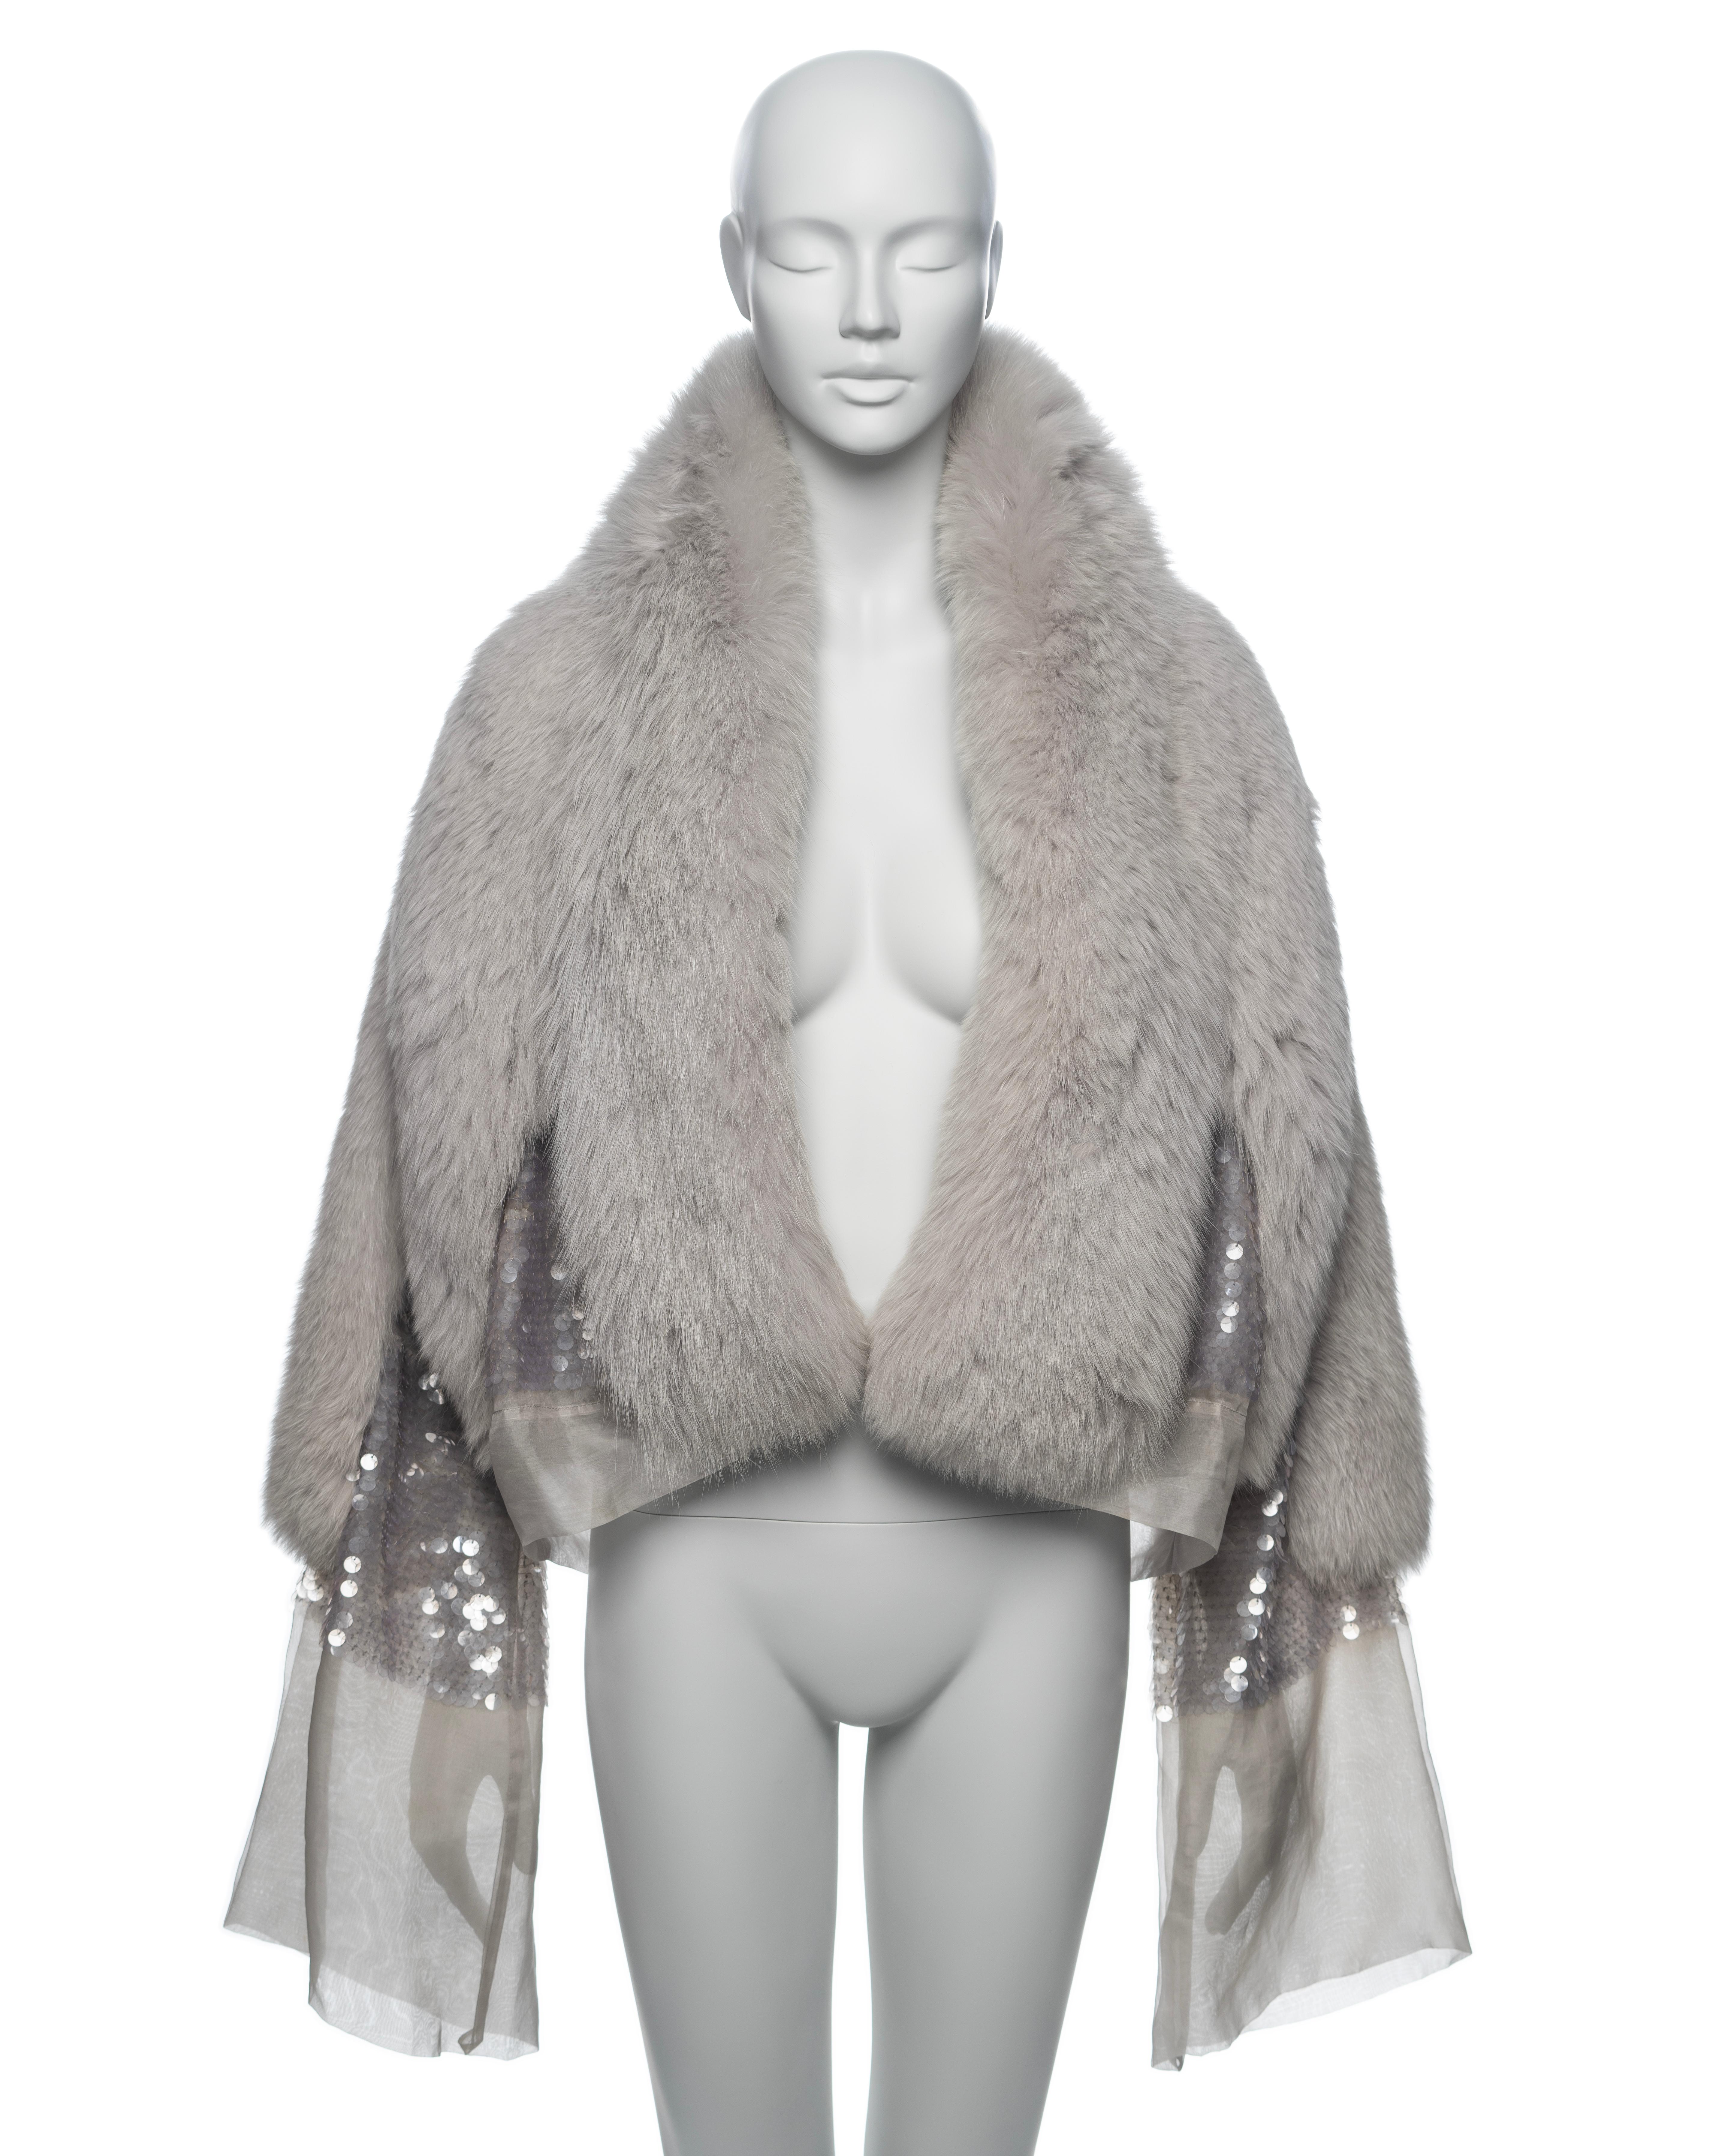 ▪ Brand: Gucci
▪ Creative Director: Tom Ford
▪ Collection: Fall-Winter 2004
▪ Sold by: One of a Kind Archive
▪ Fabric: Silver fox fur on paillette embroidered silk organza 
▪ Details: Secured by wrapping two long ribbon ties around the waist
▪